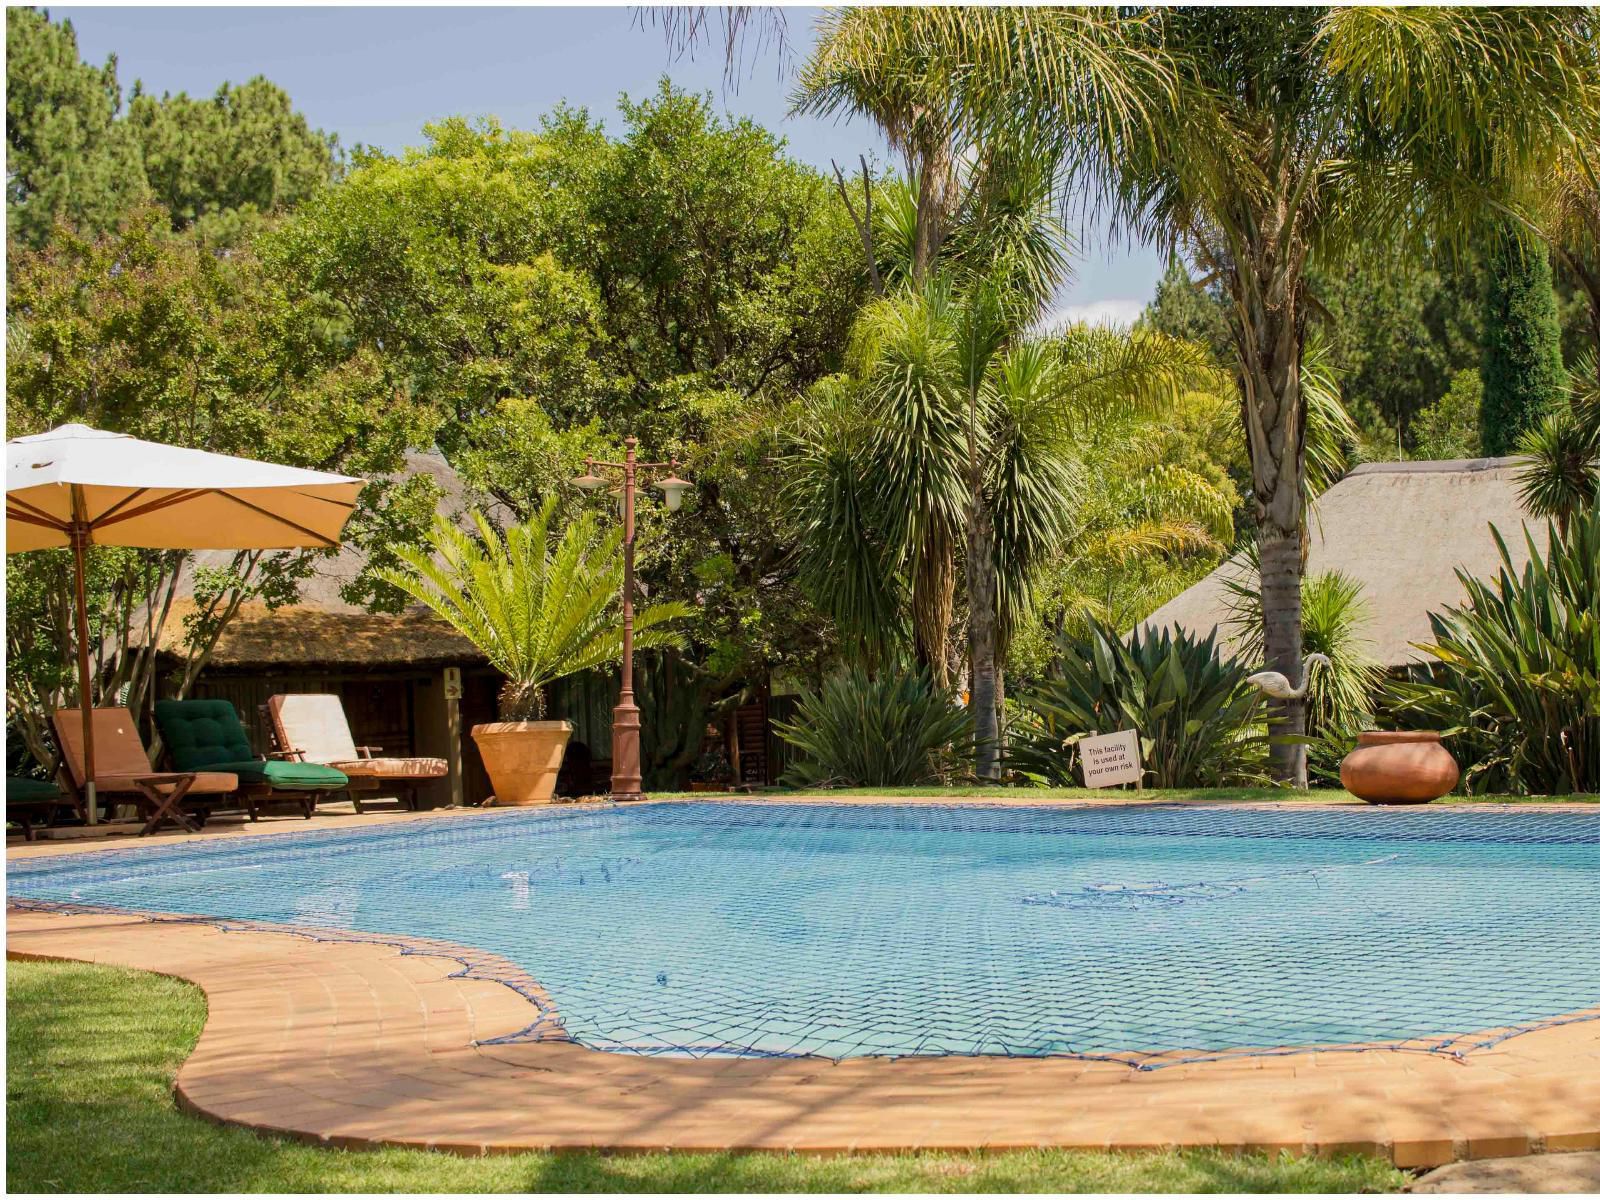 The Orchards Executive Accommodation Midrand Midrand Johannesburg Gauteng South Africa Palm Tree, Plant, Nature, Wood, Garden, Swimming Pool